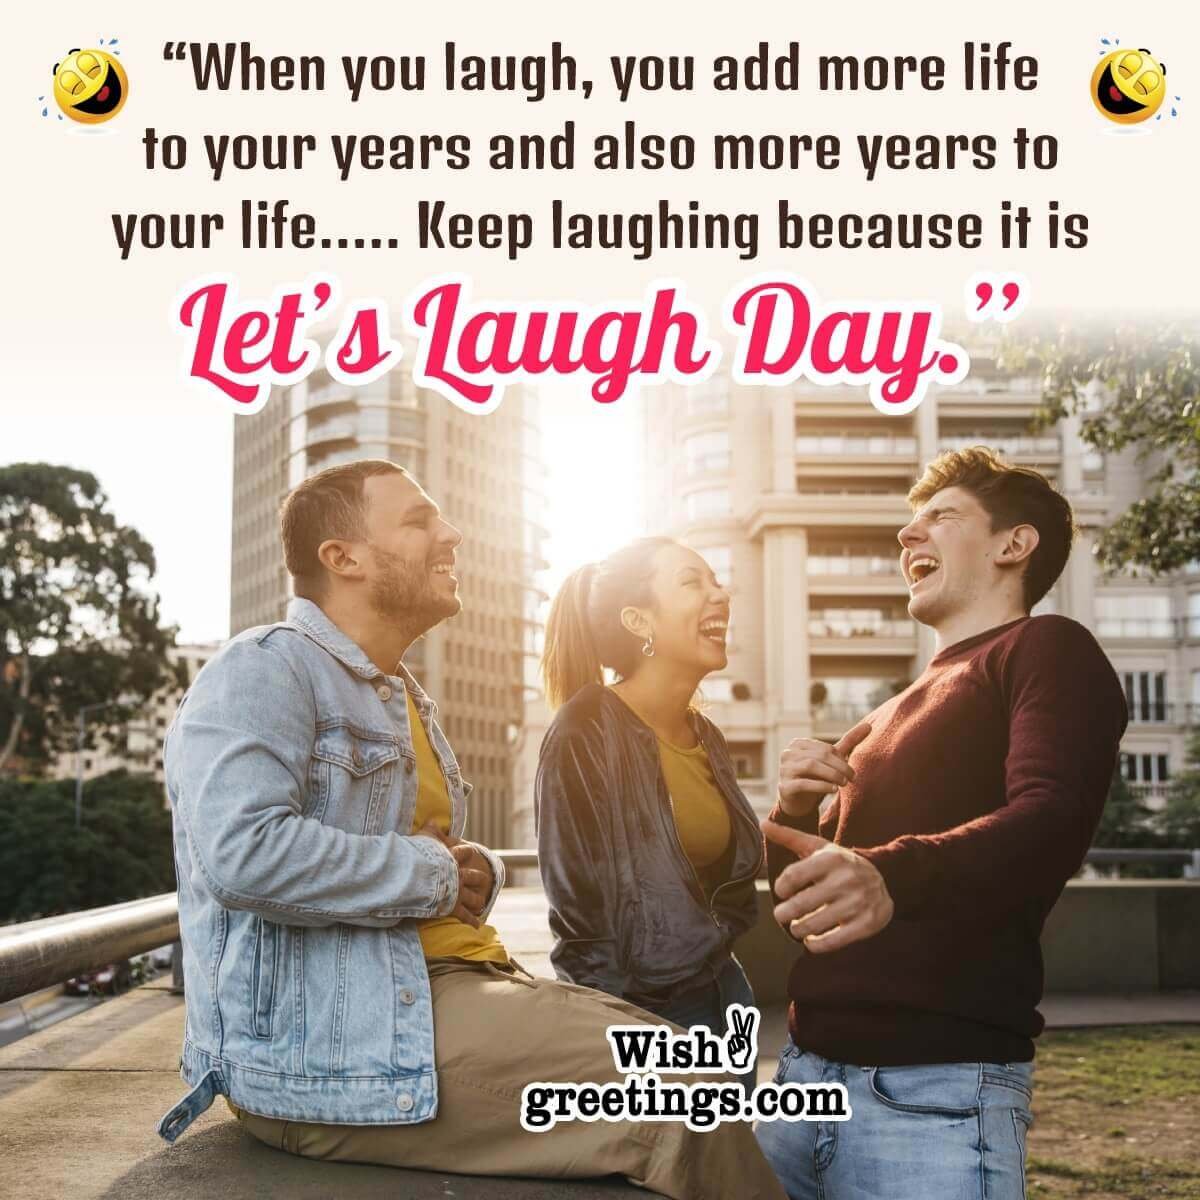 Let’s Laugh Day Message Picture